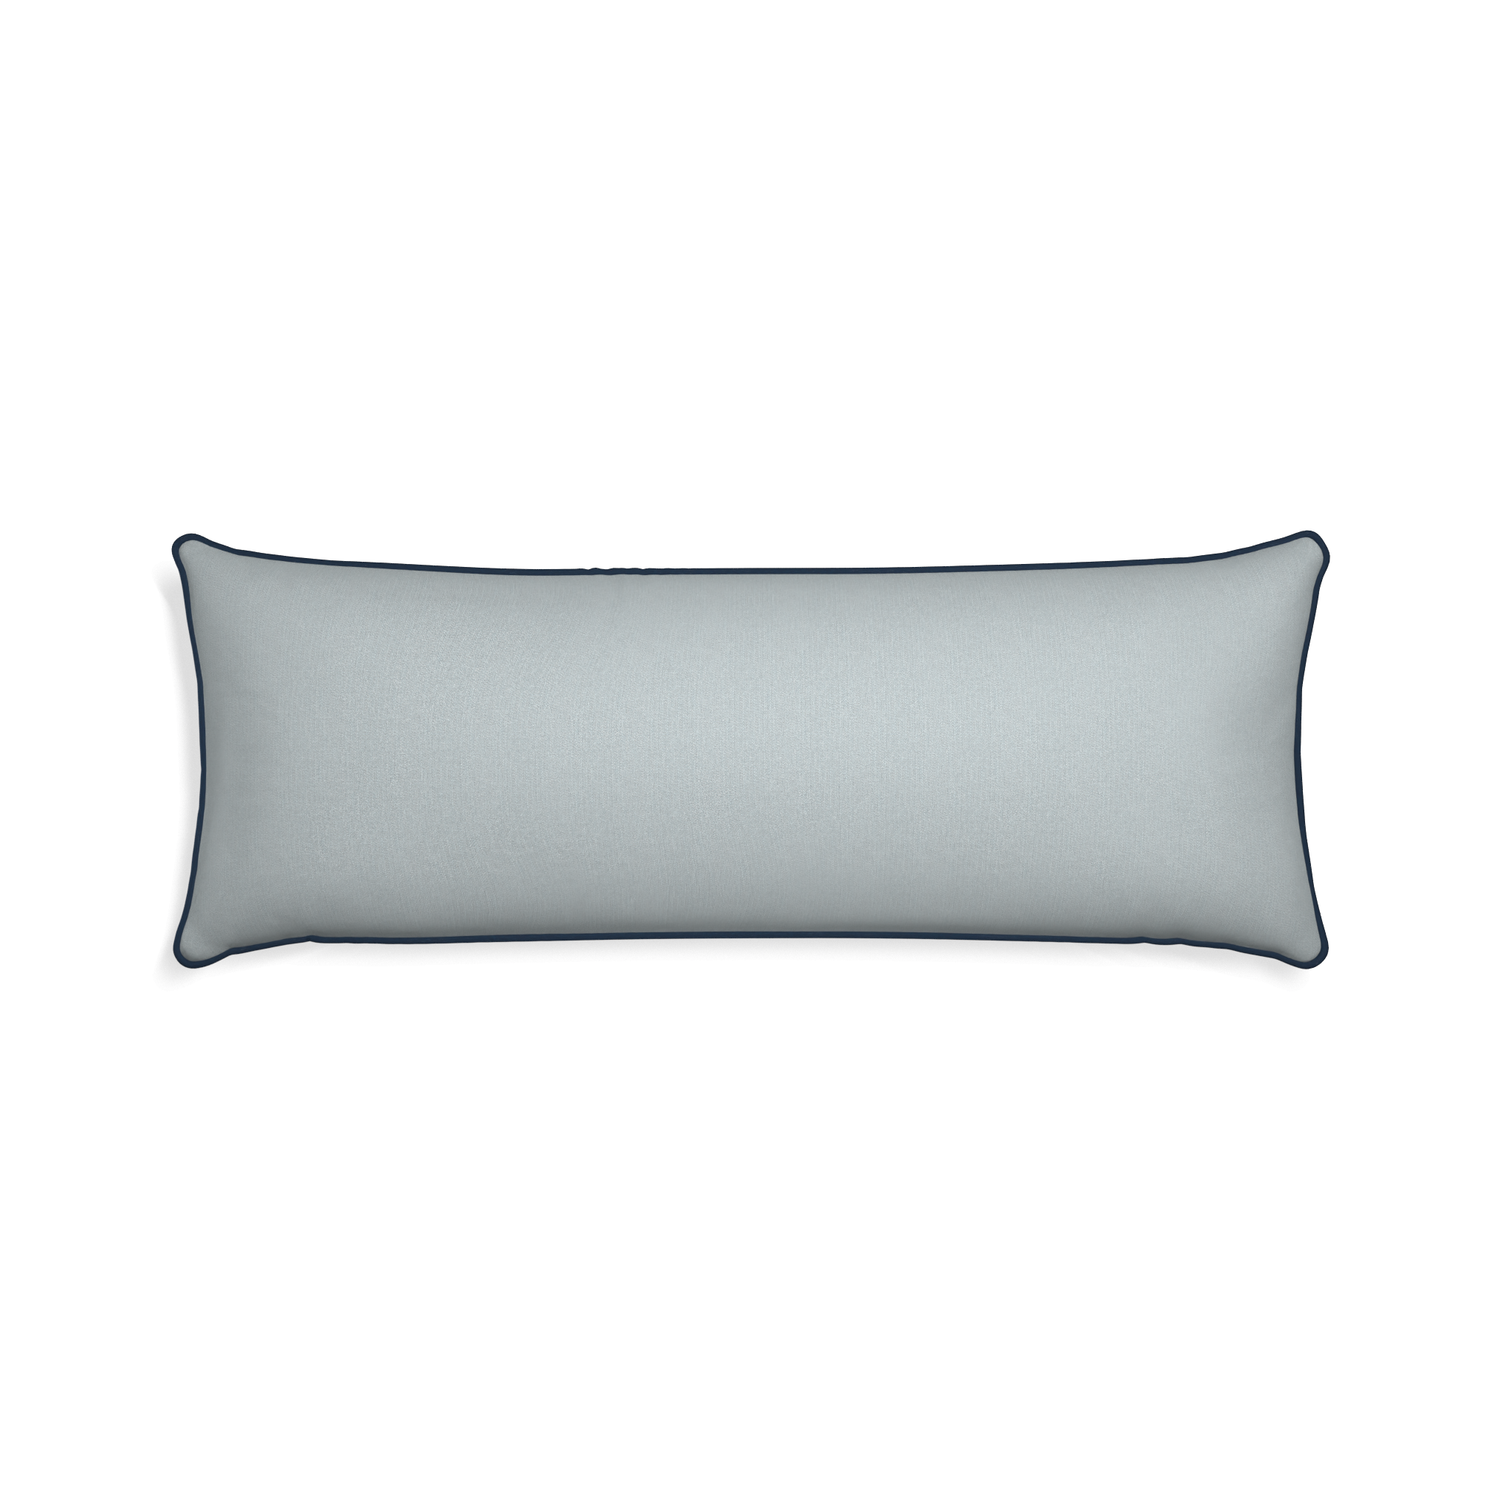 Xl-lumbar sea custom grey bluepillow with c piping on white background